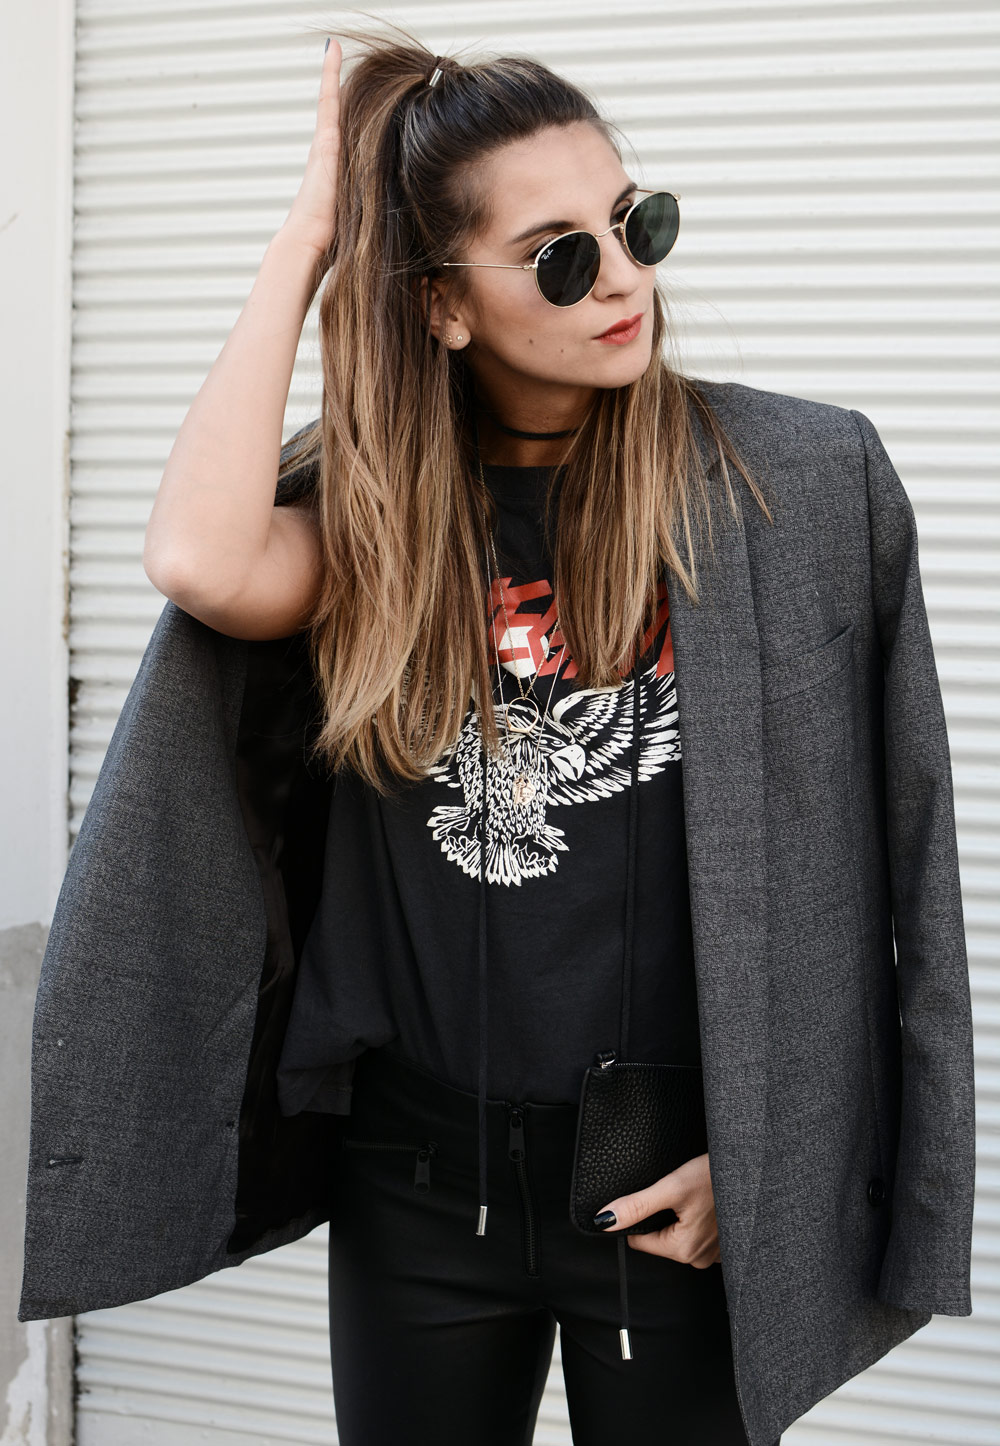 Band T Shirt Style Streetstyle Wien Vienna Festival Look Style